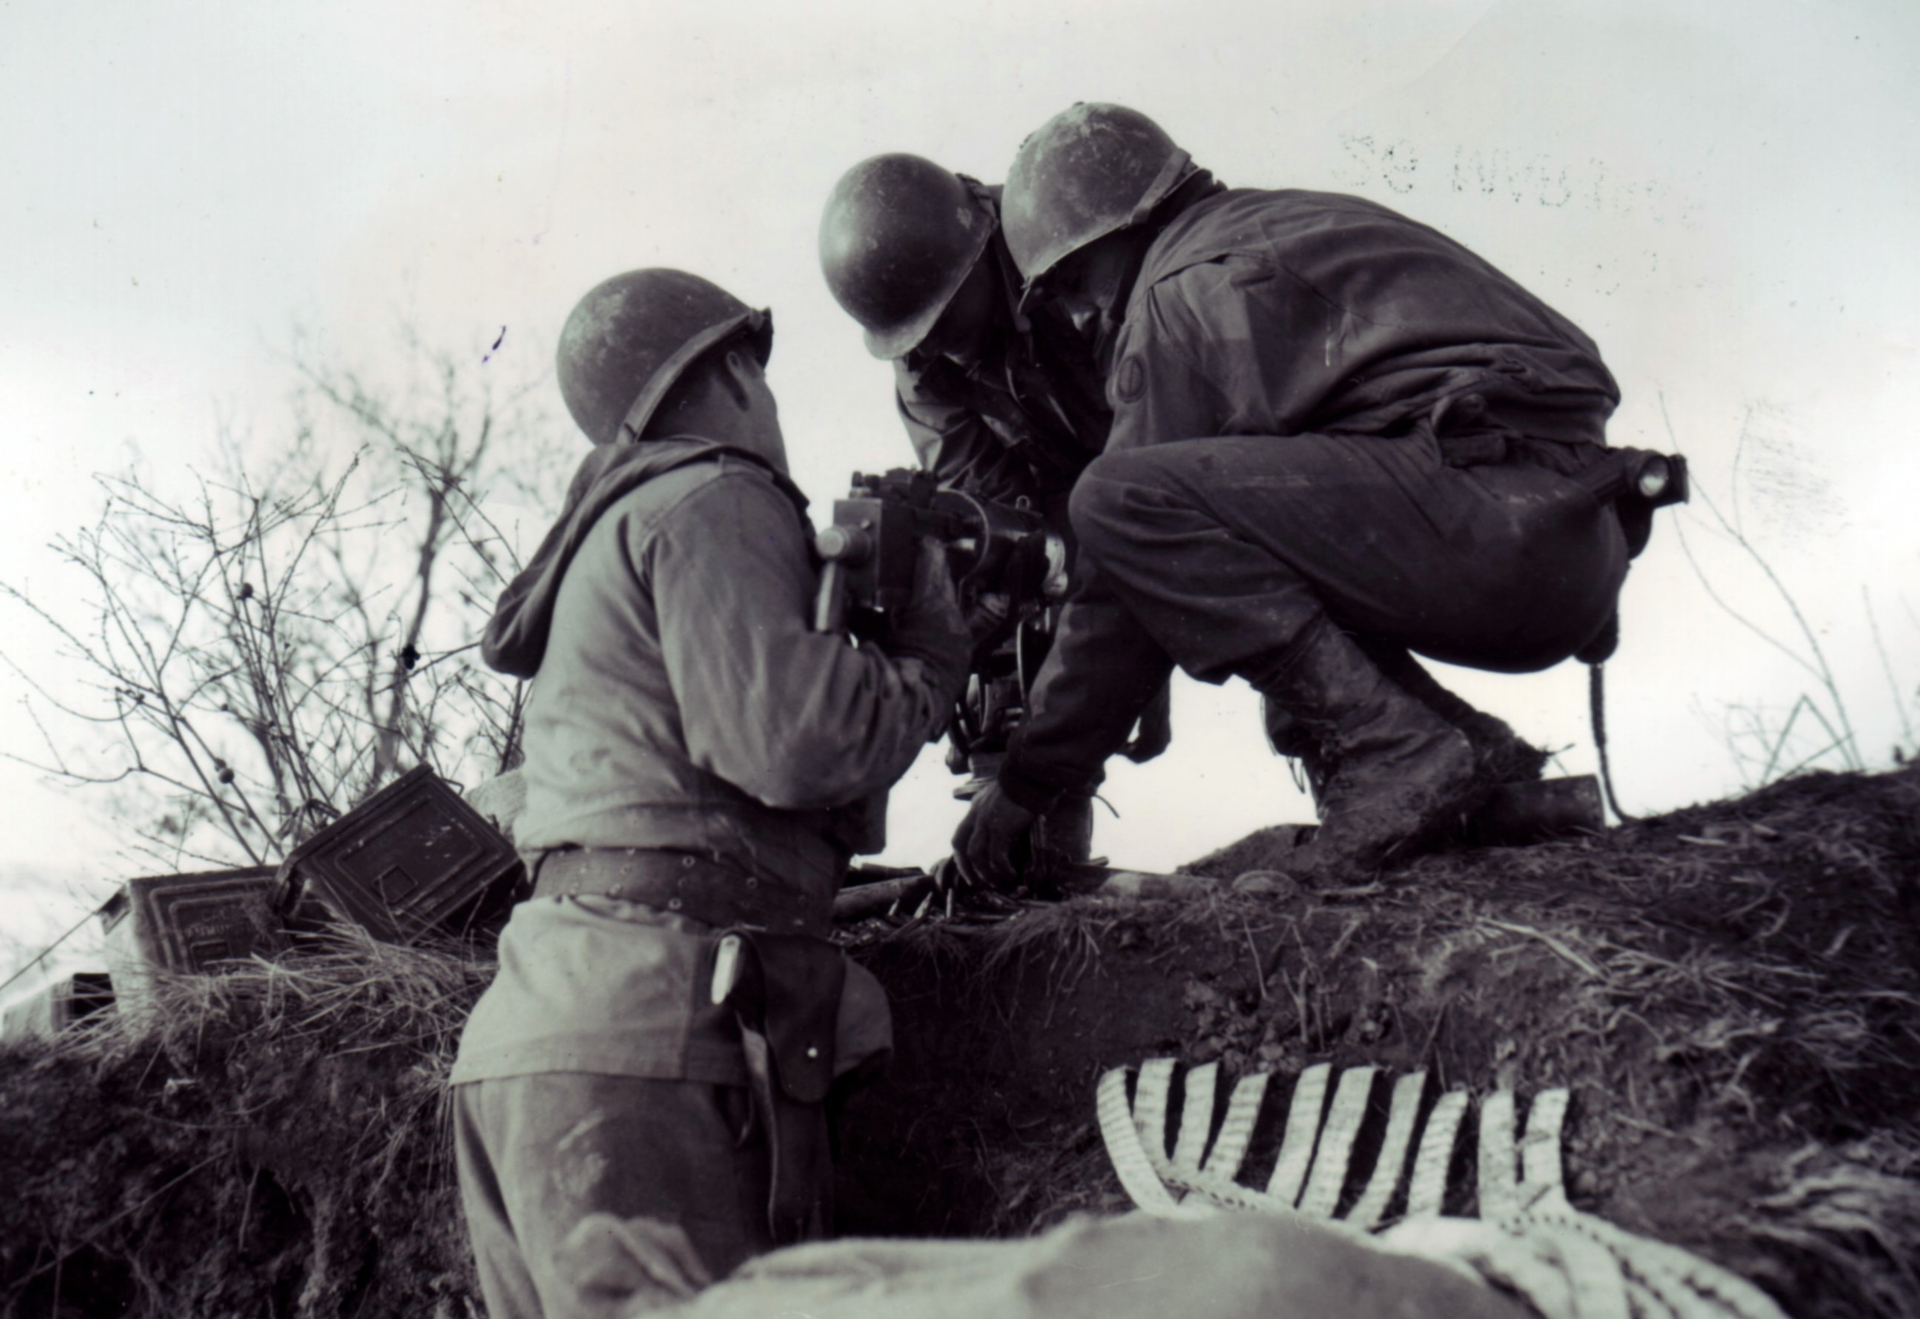 The “heavy Browning”: Moving a complete M1917 MG took several men to carry the 100+ pound combination of the gun (with water), tripod, and basic load of ammunition. Italy, February 1945